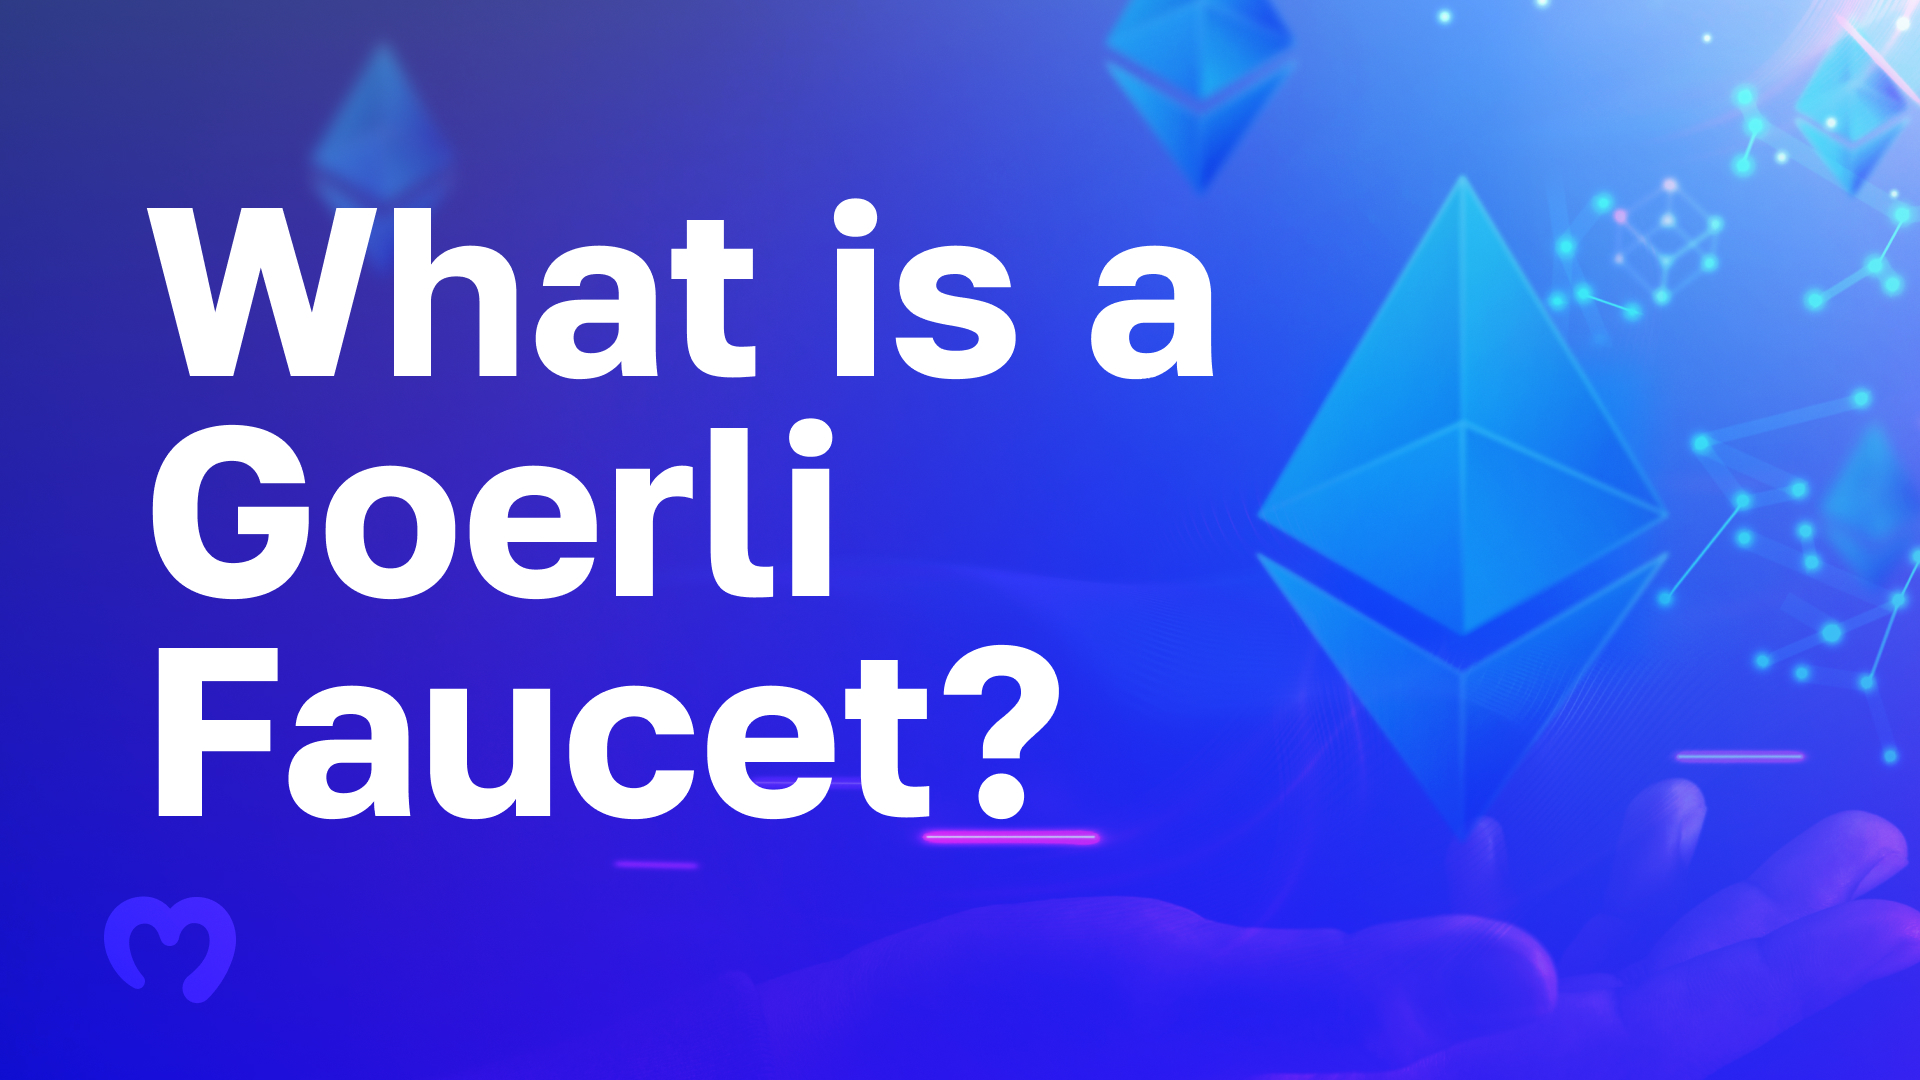 Title - What is a Goerli Faucet?